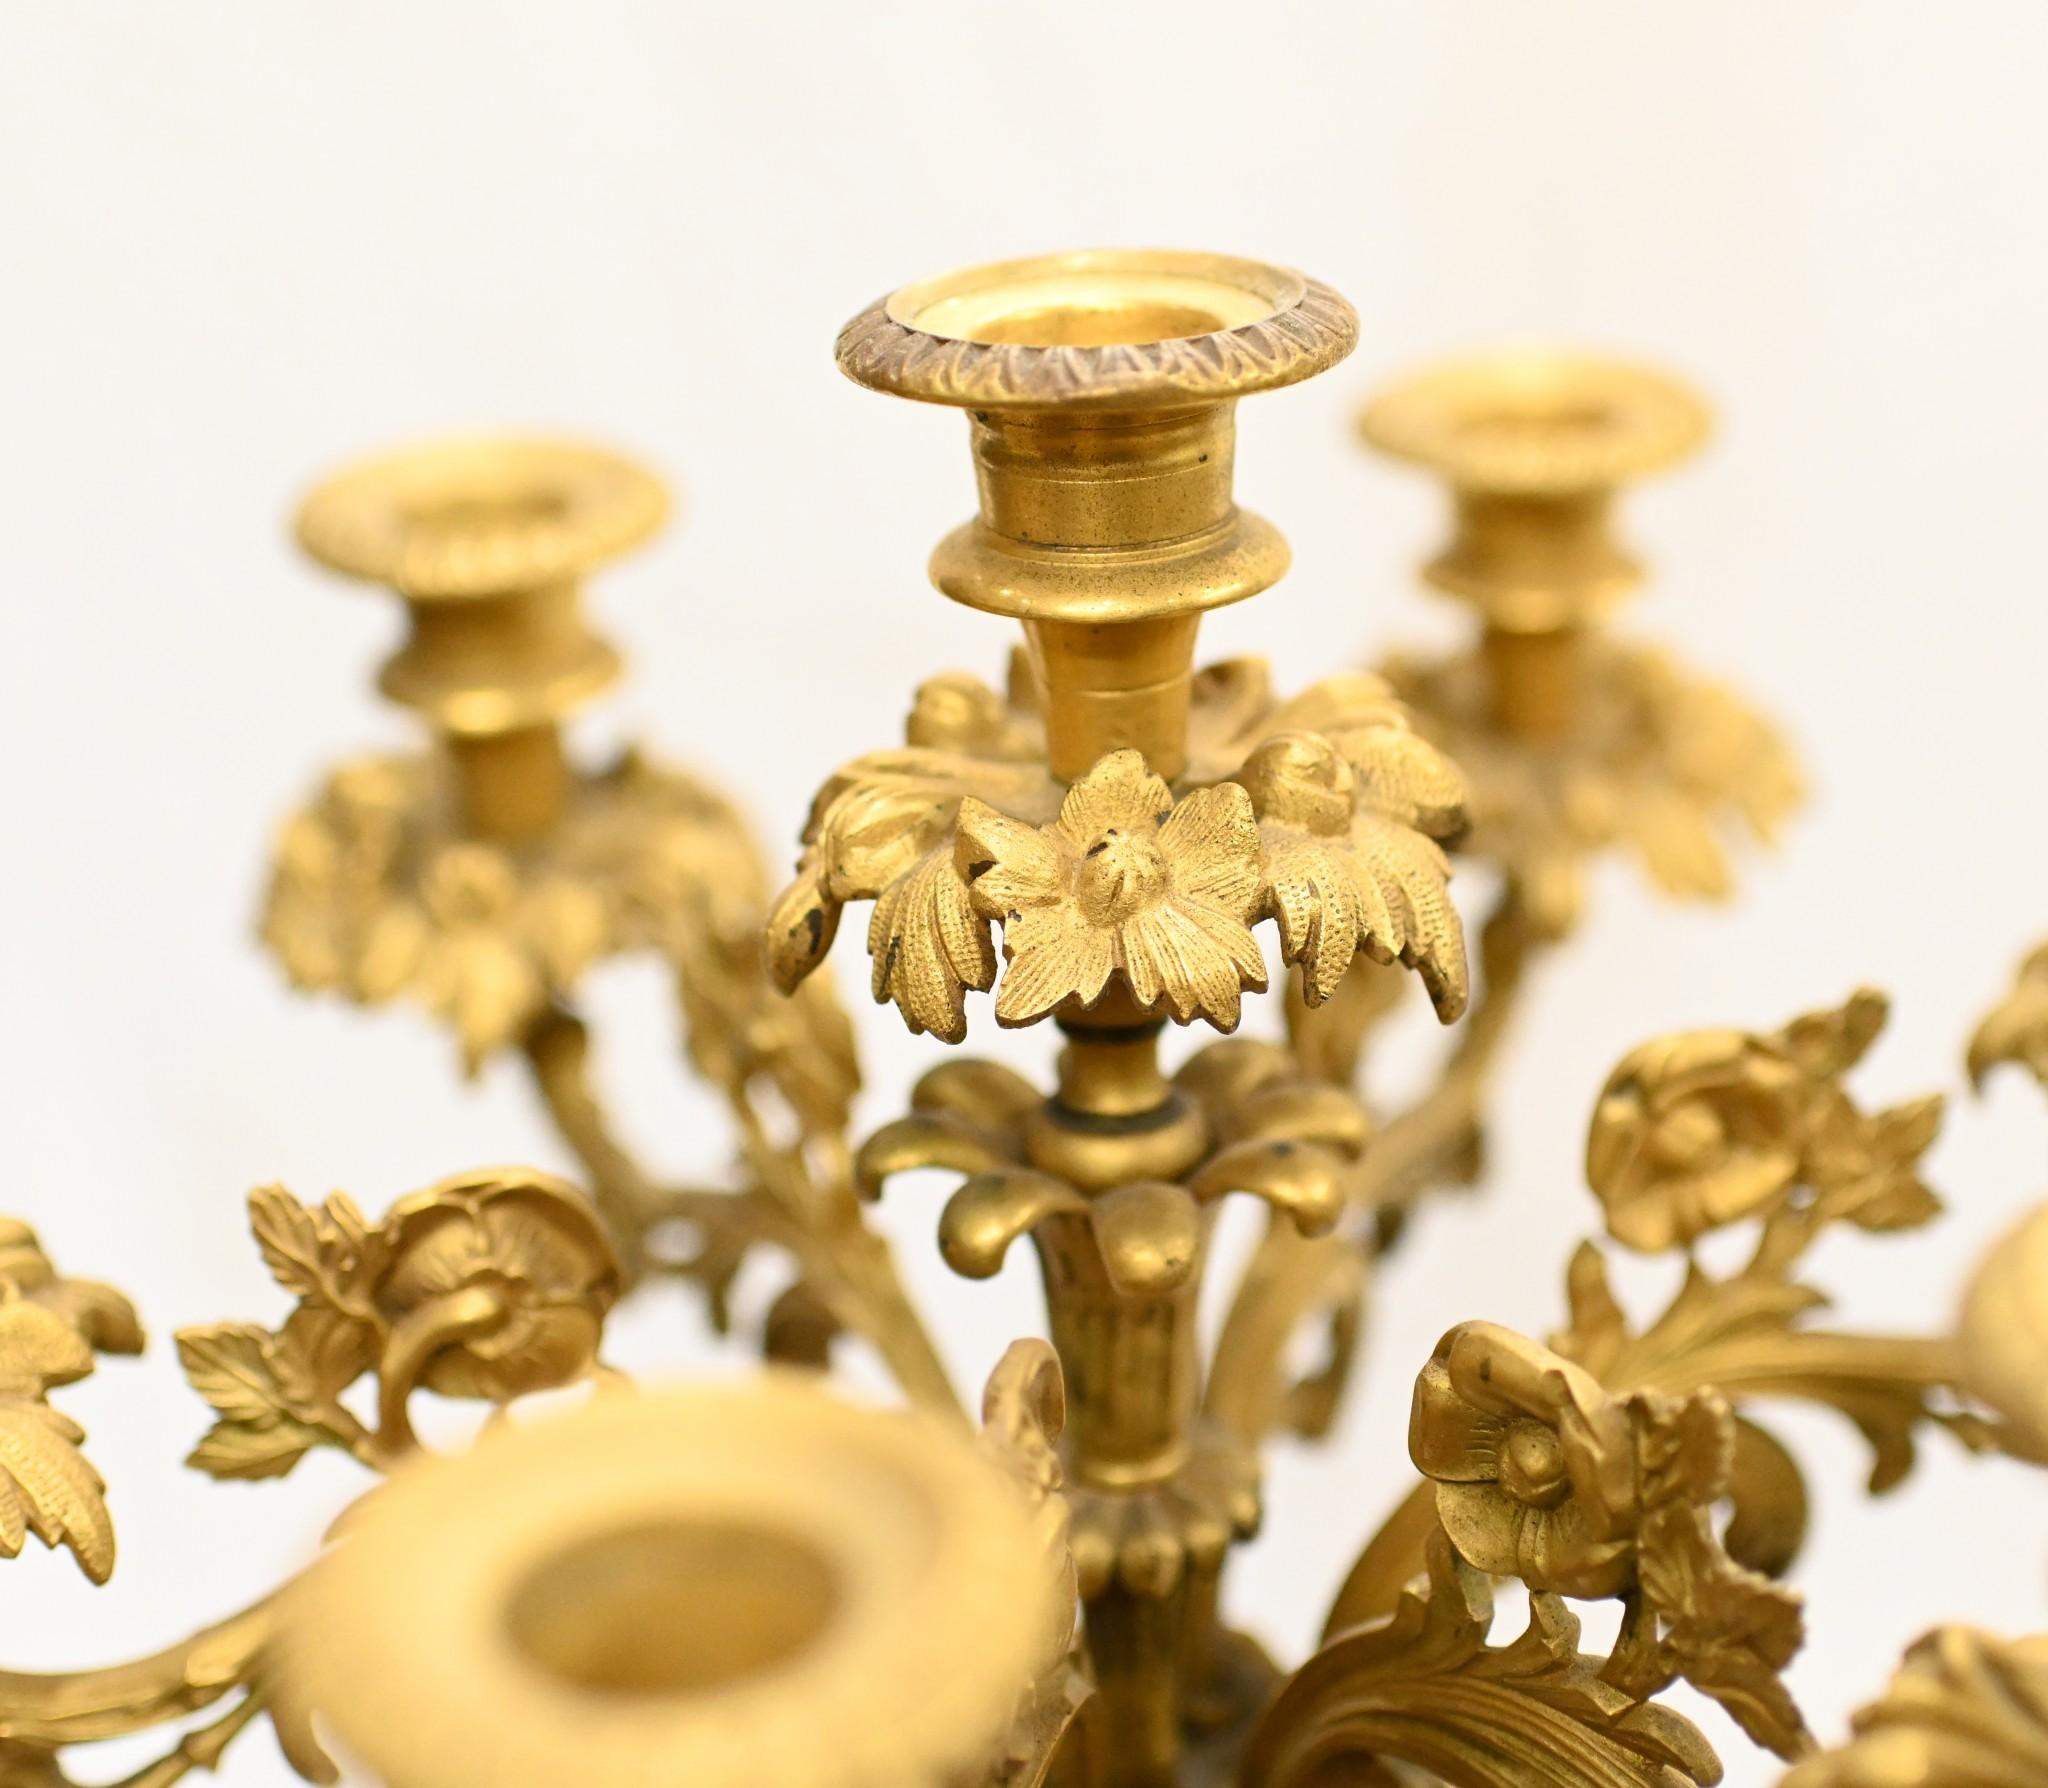 Gorgeous pair of French antique candelabras in ormolu
Perfect left and right maidens hold aloft the seven branch candelabras
We date this pair to circa 1880
Very ornate the quality to the casting on the ormolu is very detailed
Bought from a dealer